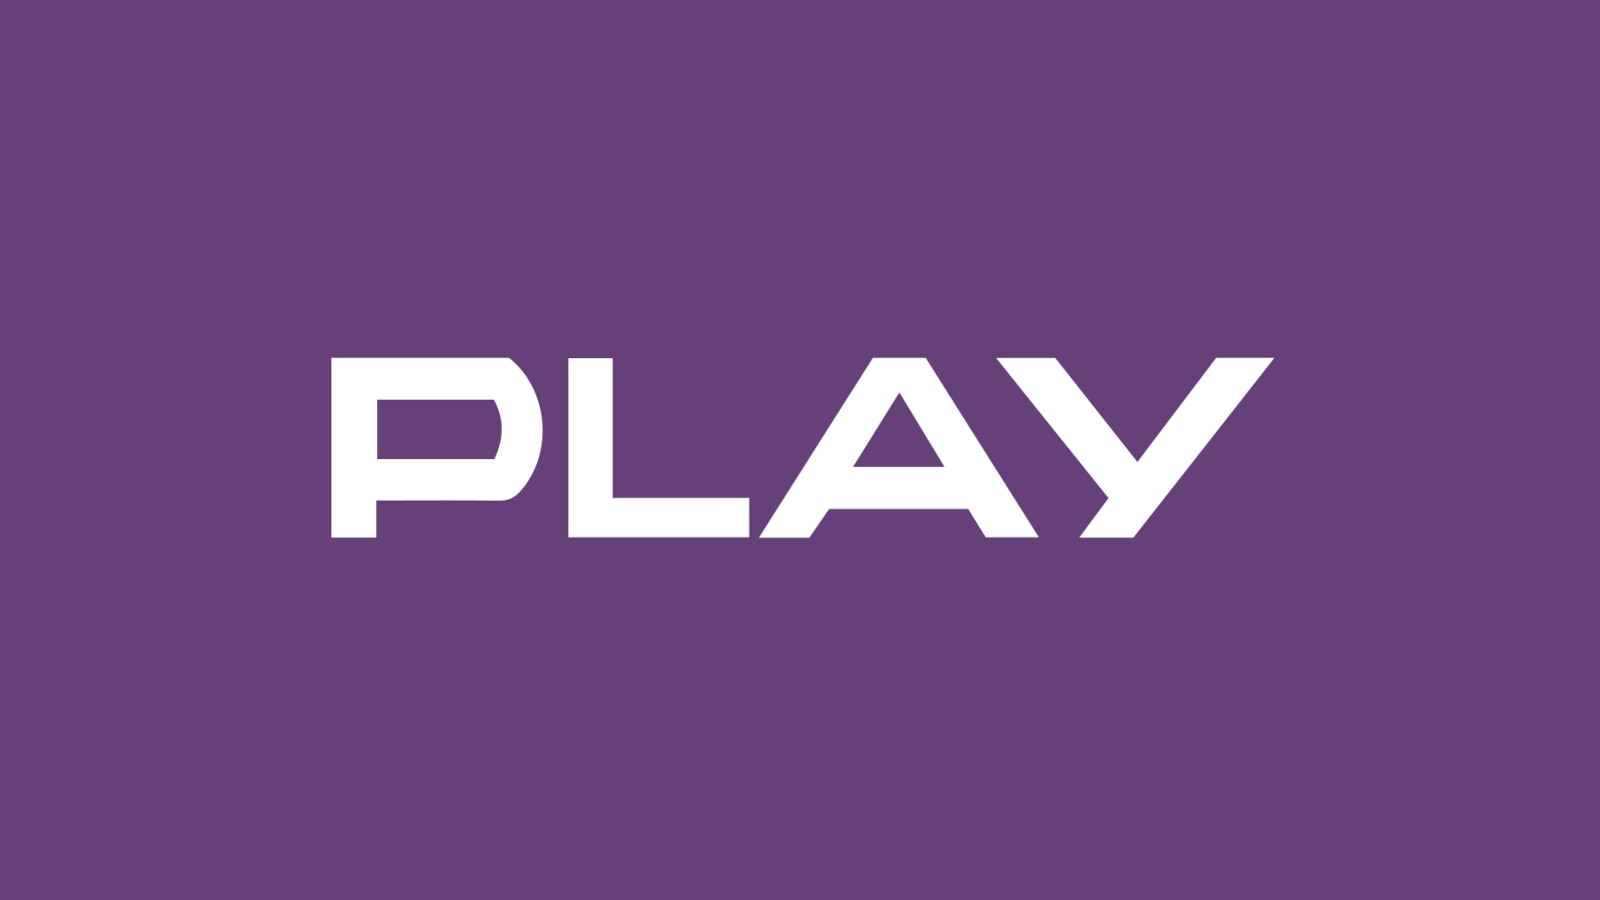 PLAY 30 PLN Mobile Top-up PL $7.93